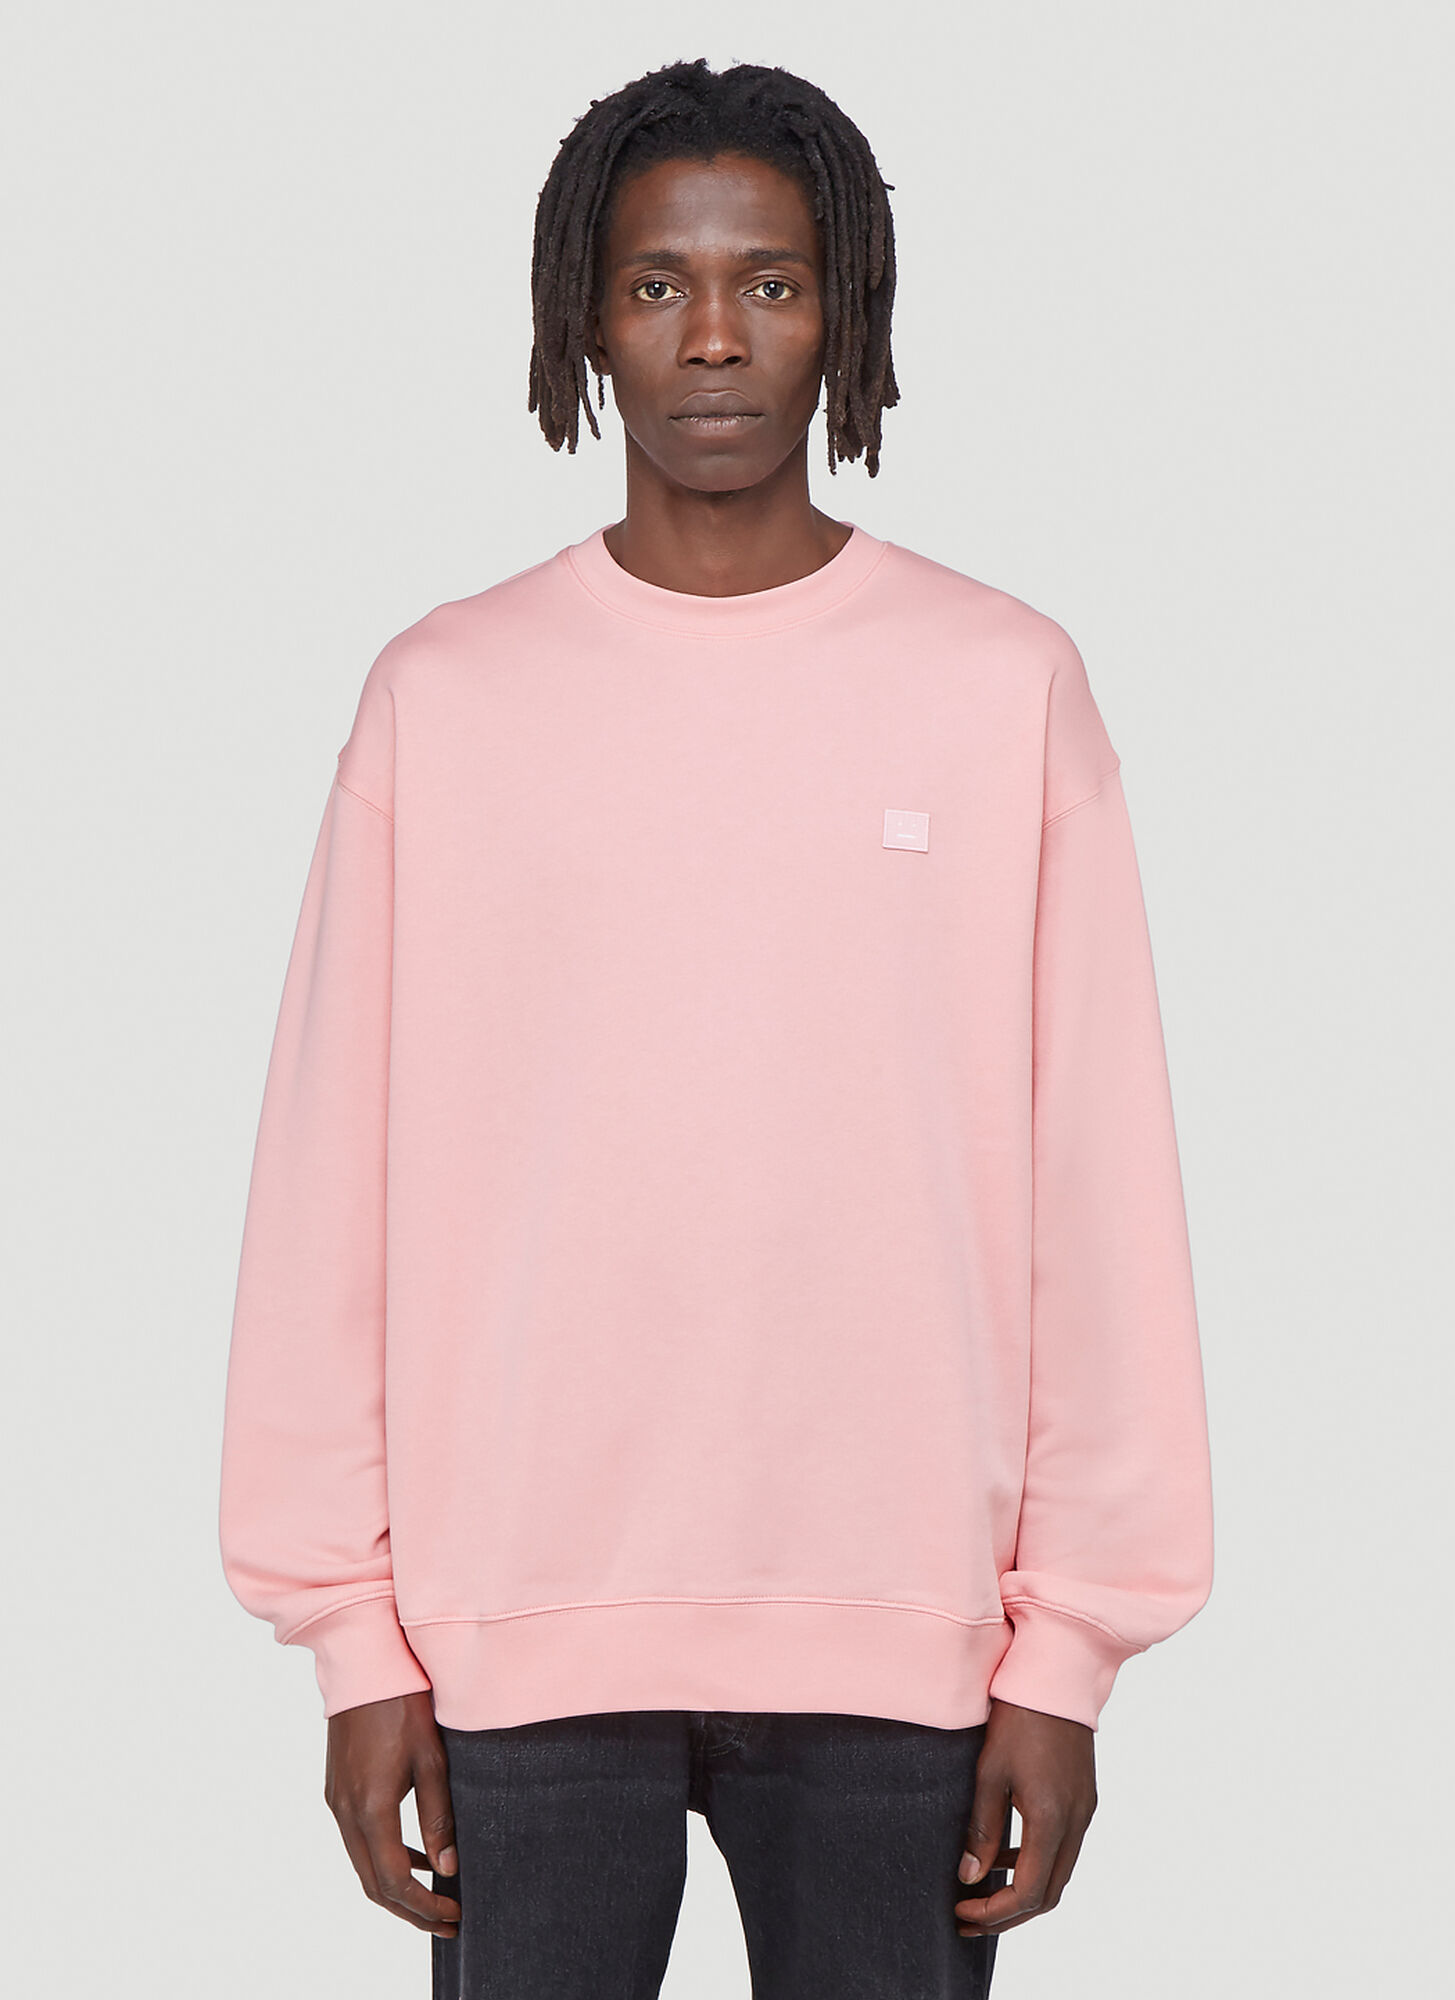 Acne Studios Face Sweatshirt in Pink size M | The Fashionisto